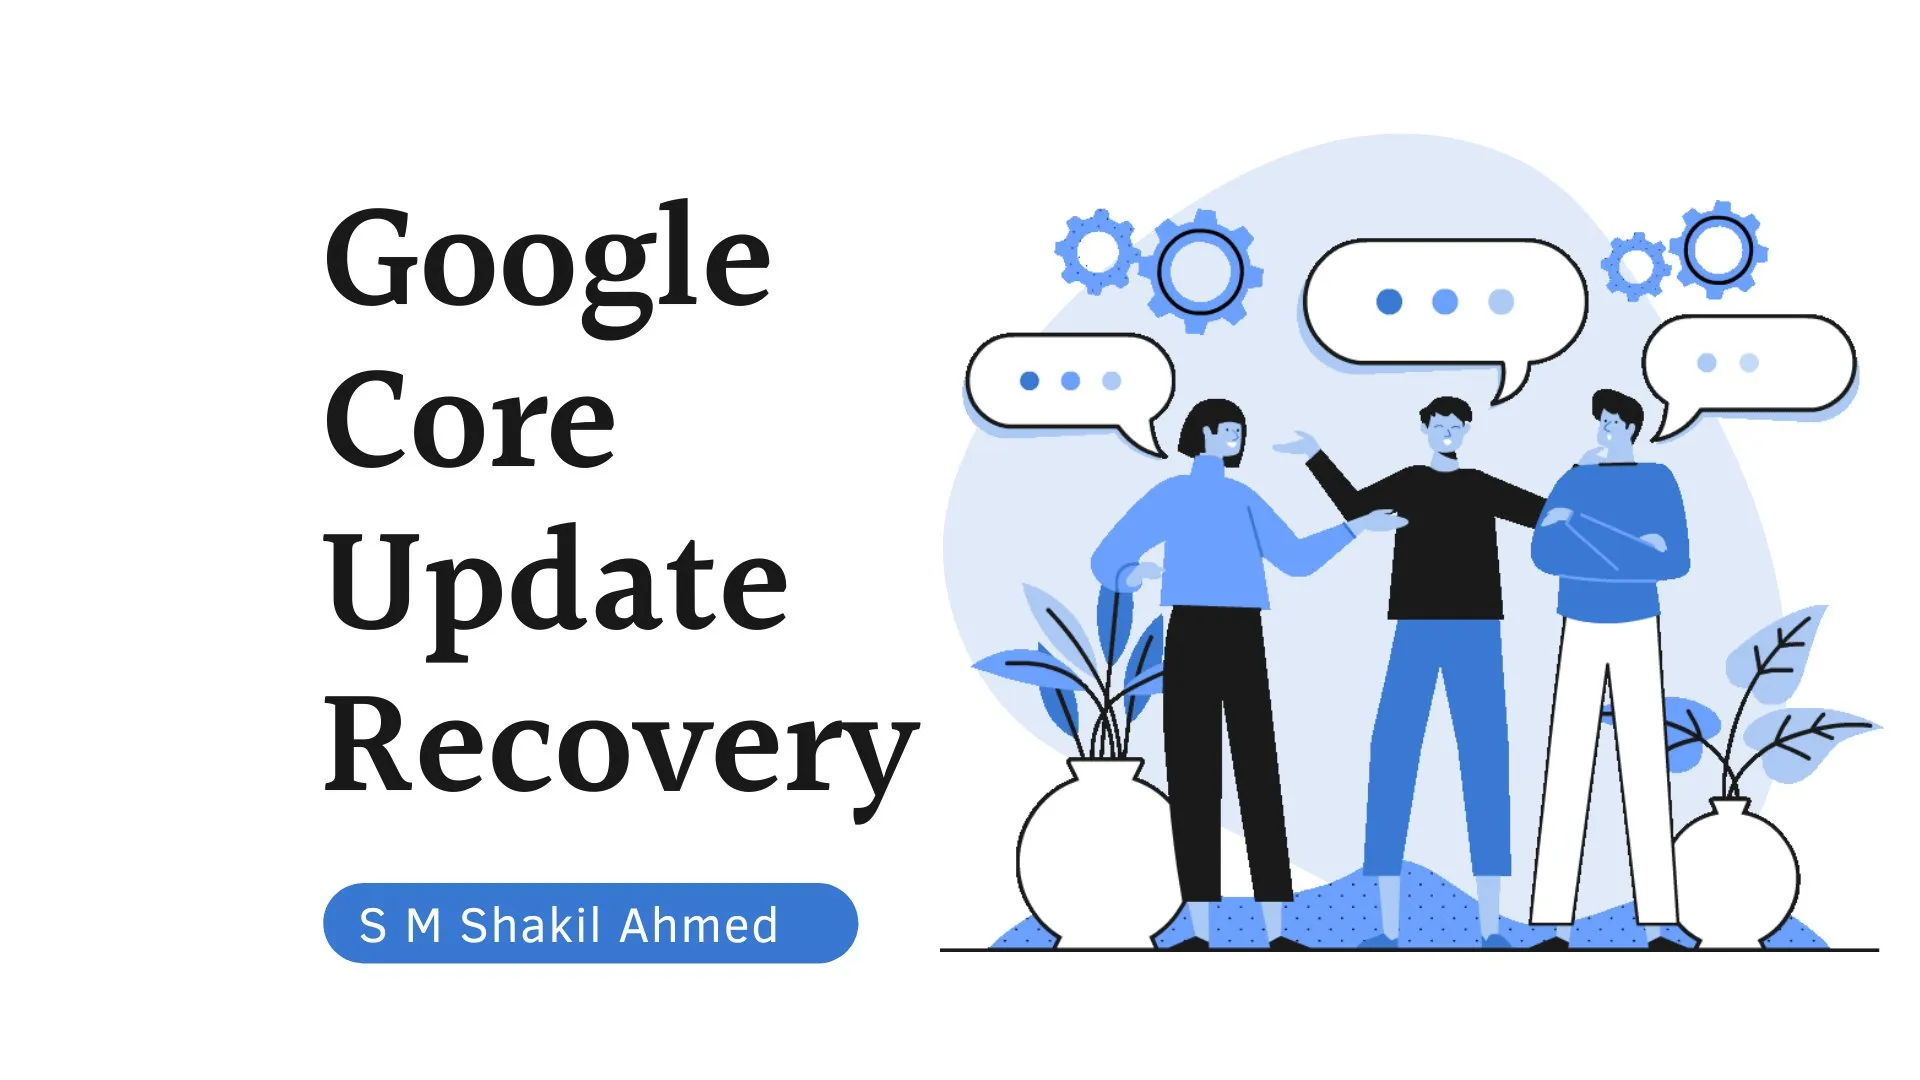 White Hat SEO Tips & Tricks on Recovering from a Google Core Update